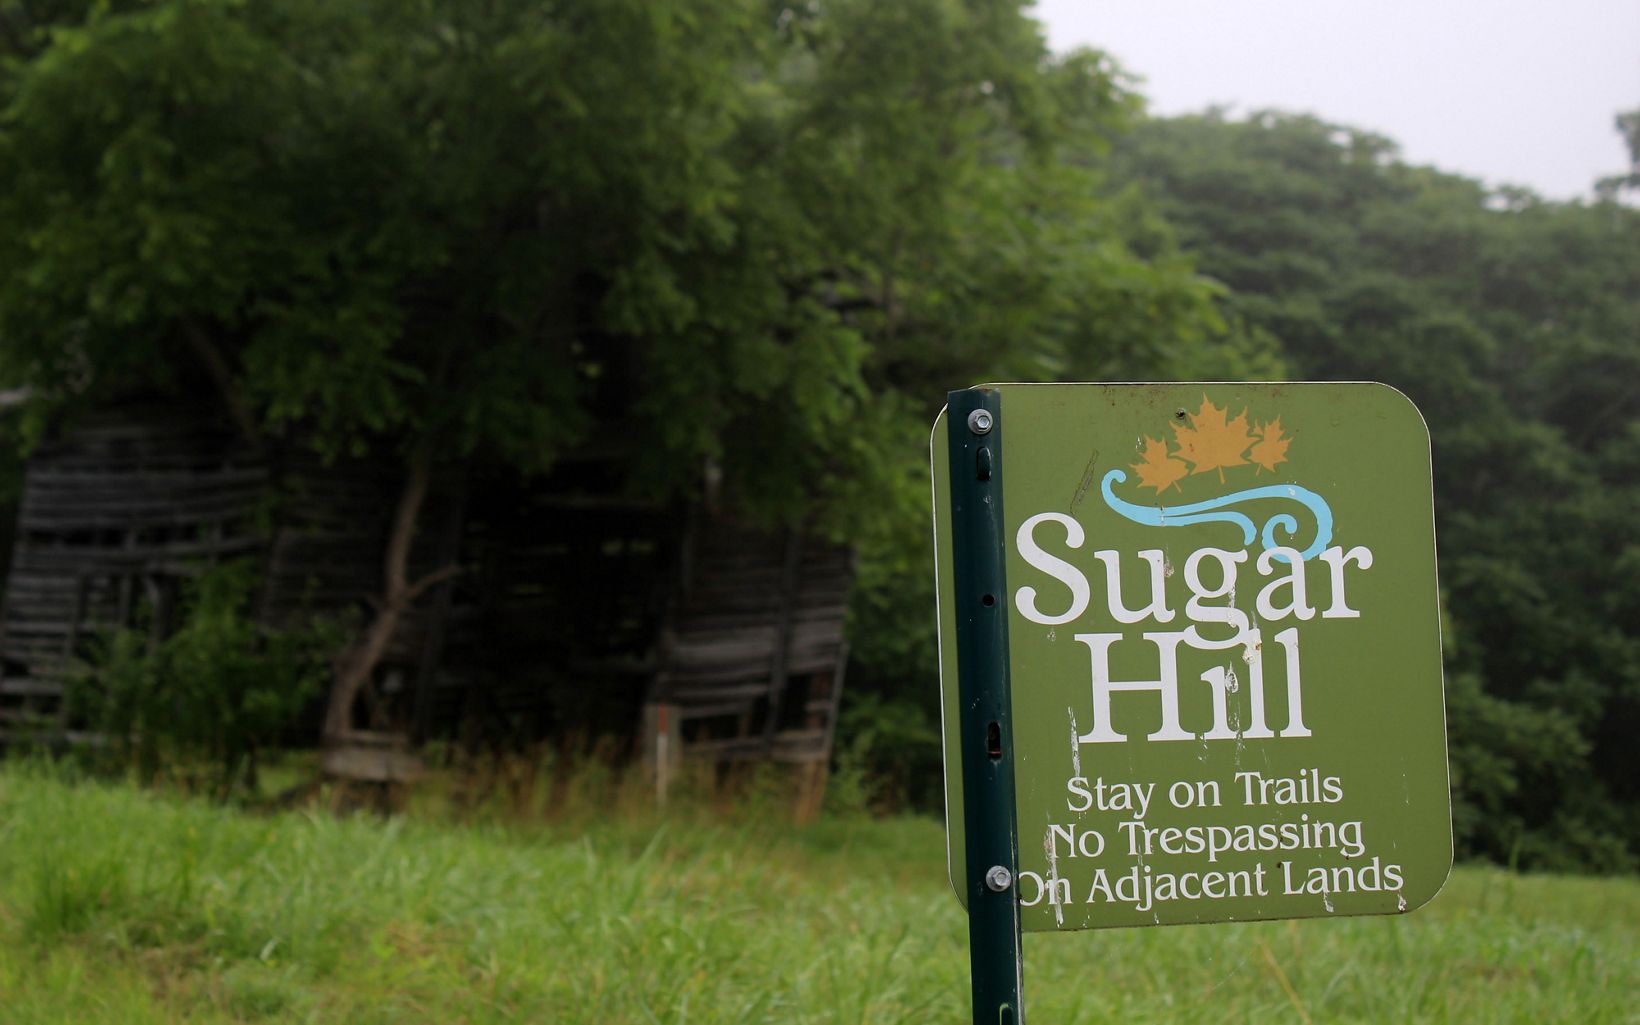 A green metal sign labeled Sugar Hill asks visitors to stay on the trail. The remnants of a cabin are visible in the background under a grove a trees.